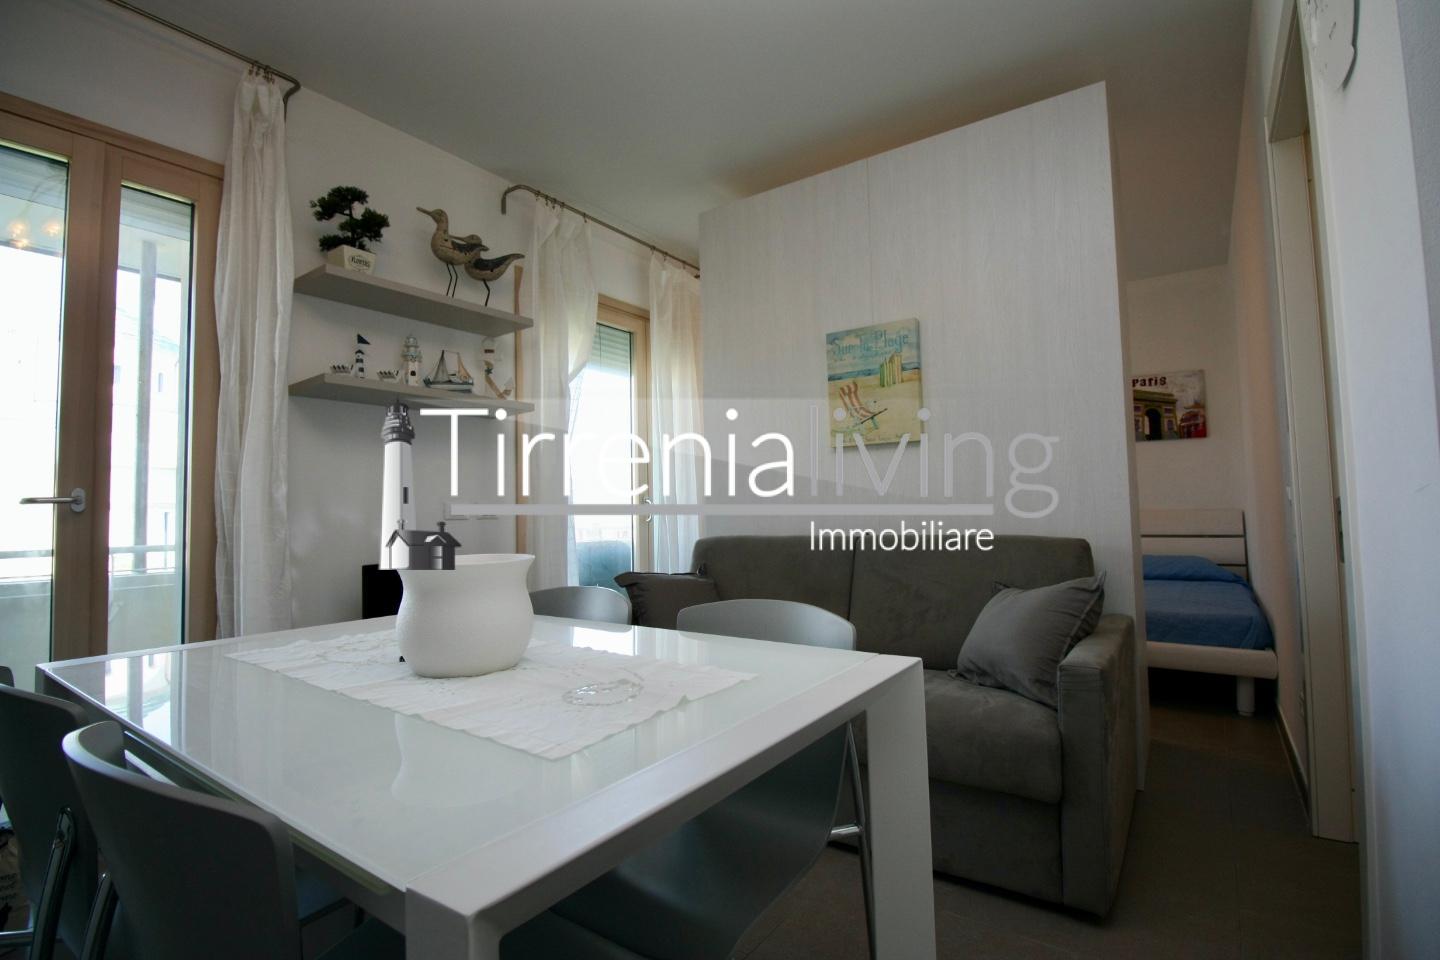 Apartment for holiday rentals, ref. A-526